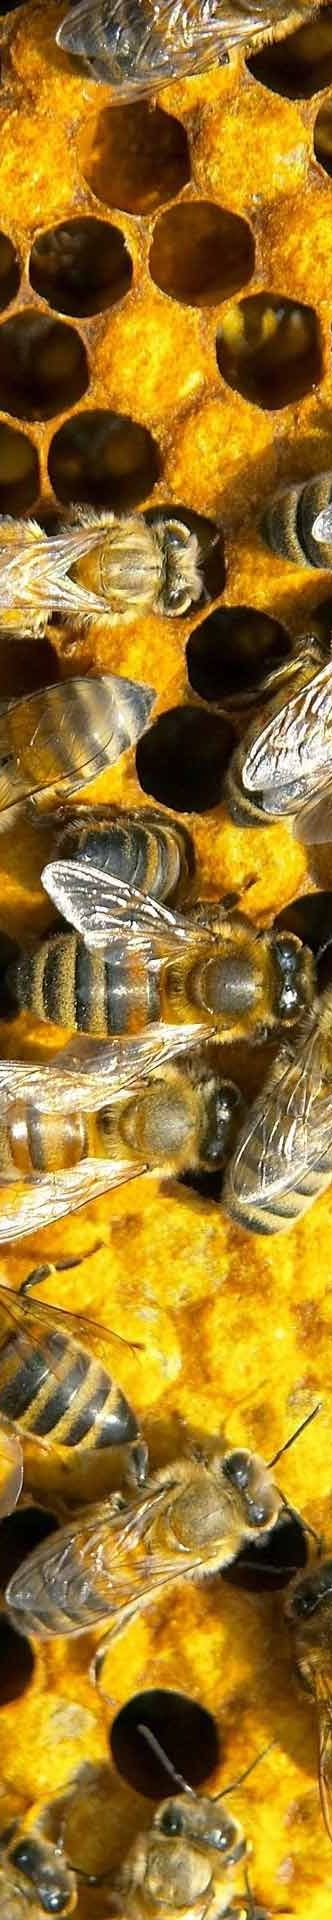 best bee loved images on pinterest bees honey bees and bee happy 9